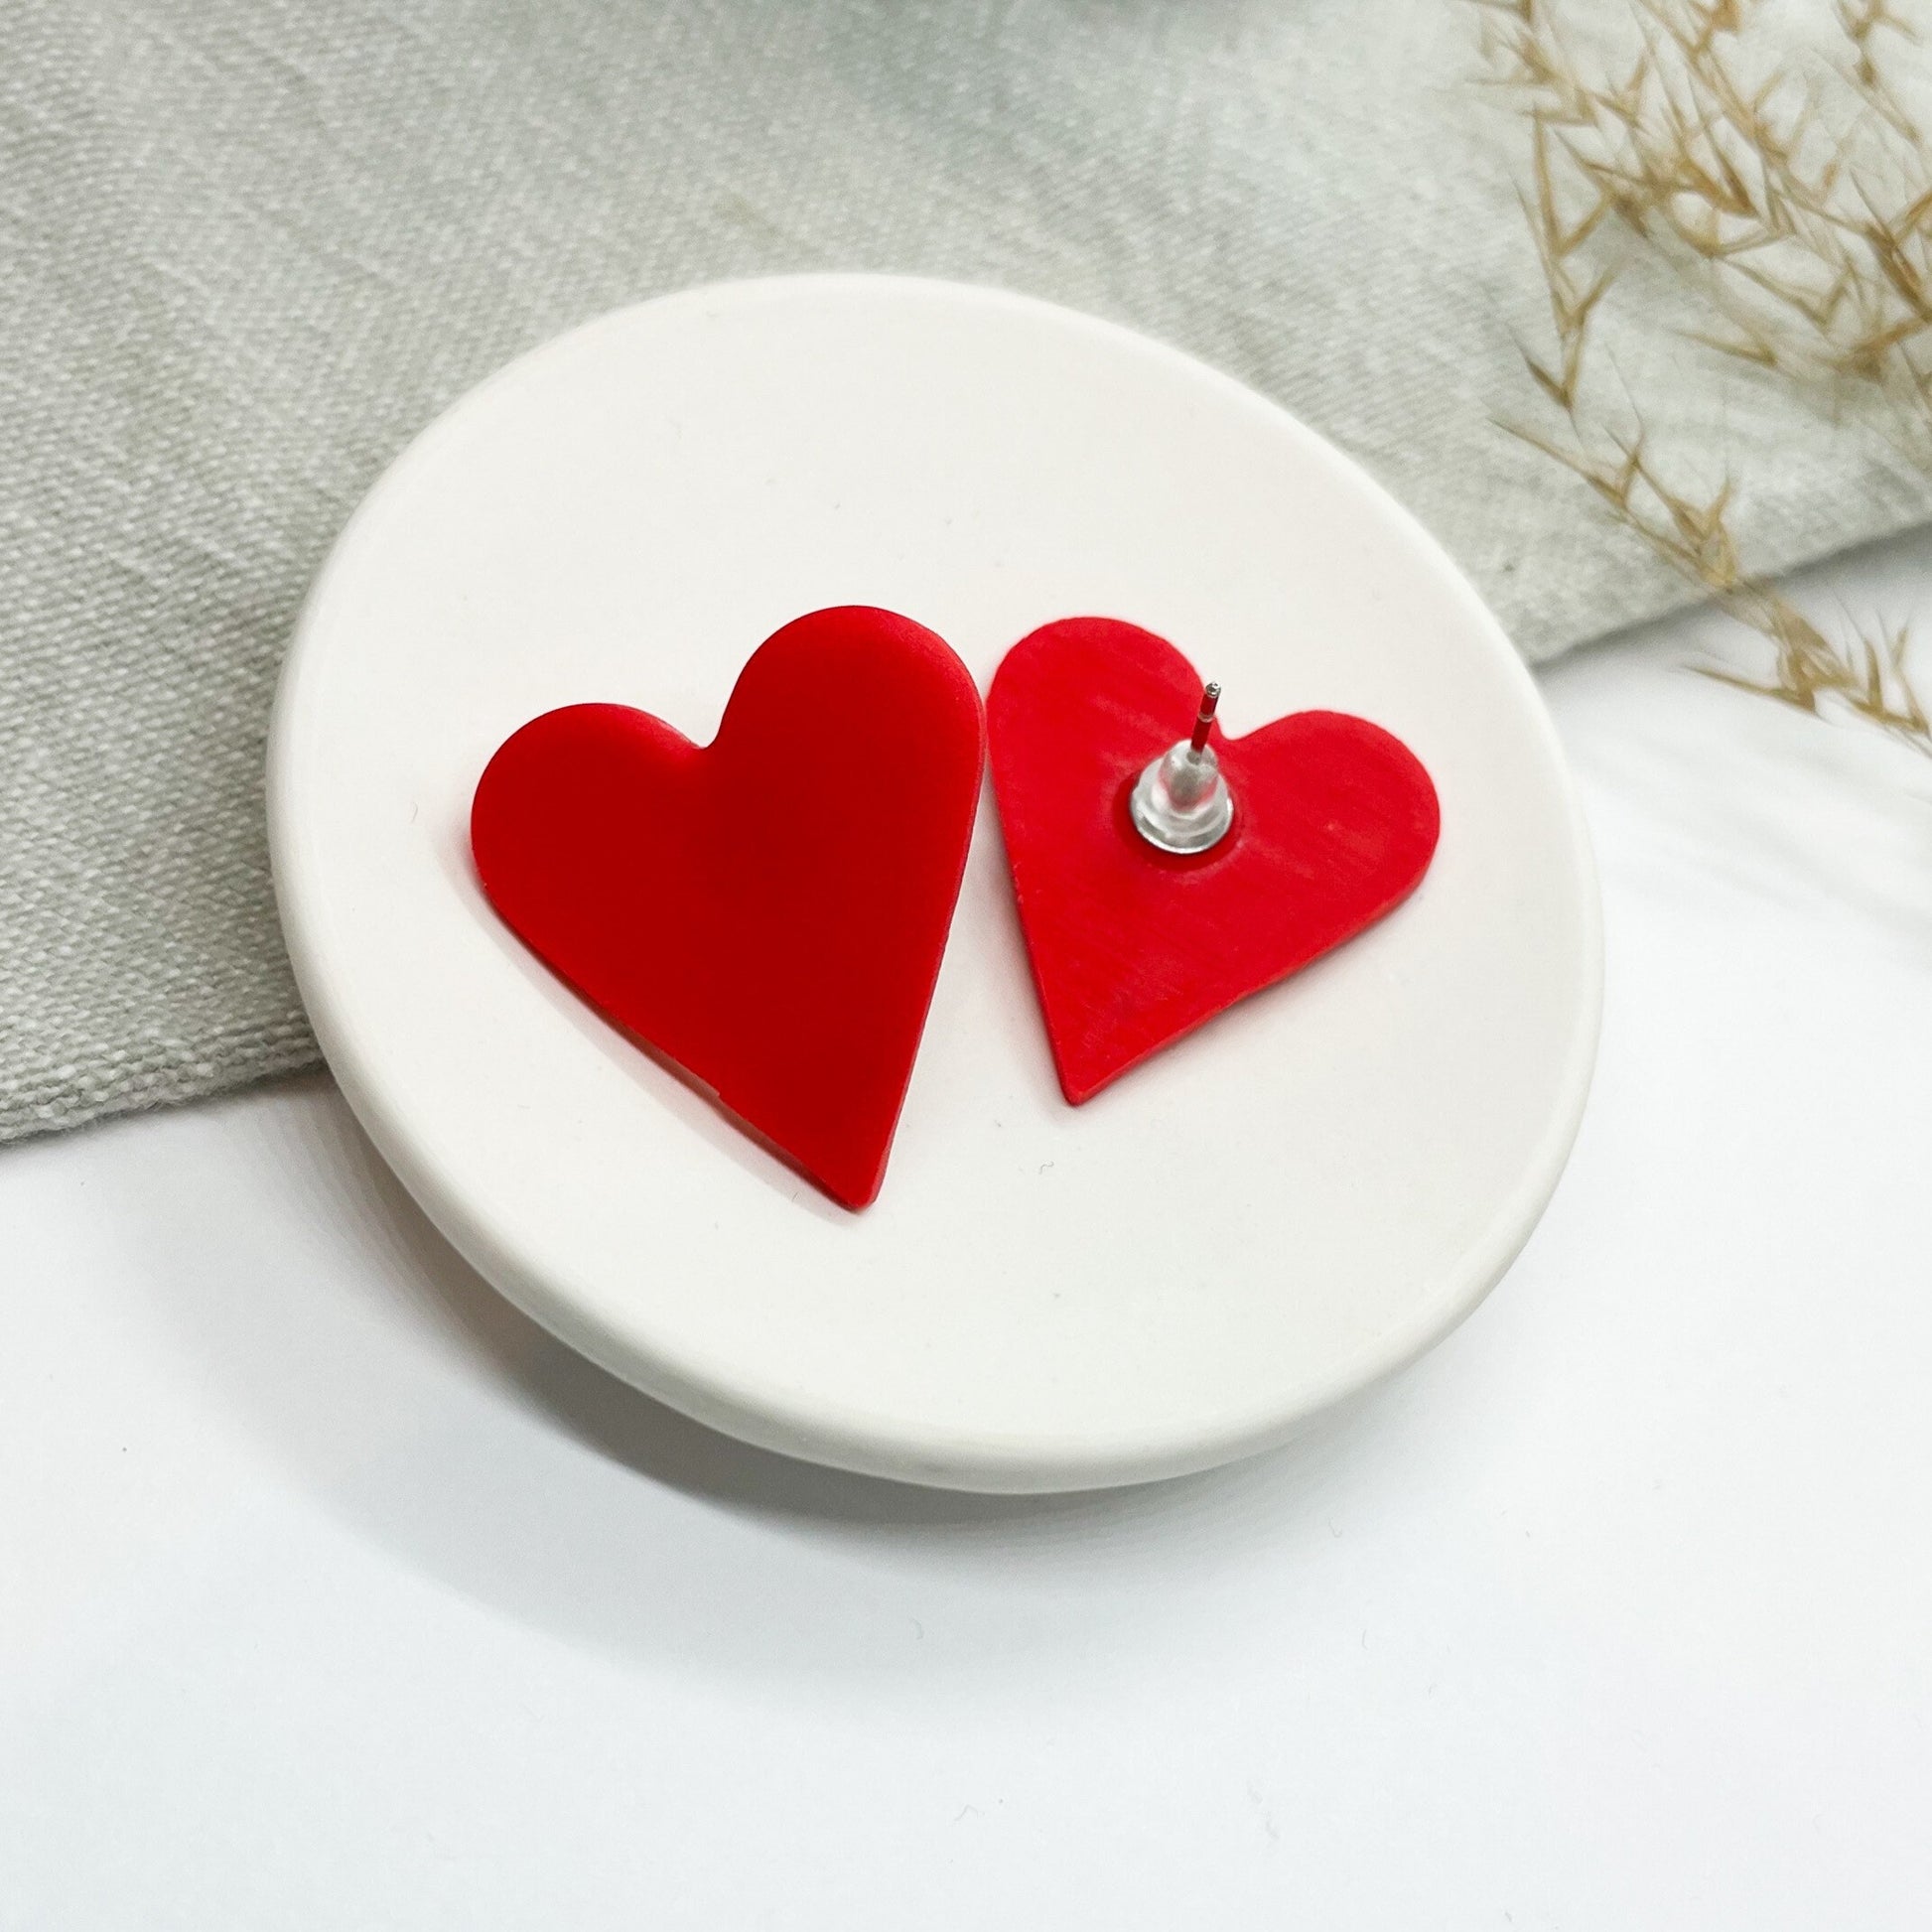 Polymer clay statement stud earrings, red heart earrings, beautiful birthday gift, galentine’s gift, Valentine’s Day gift, girlfriend gift